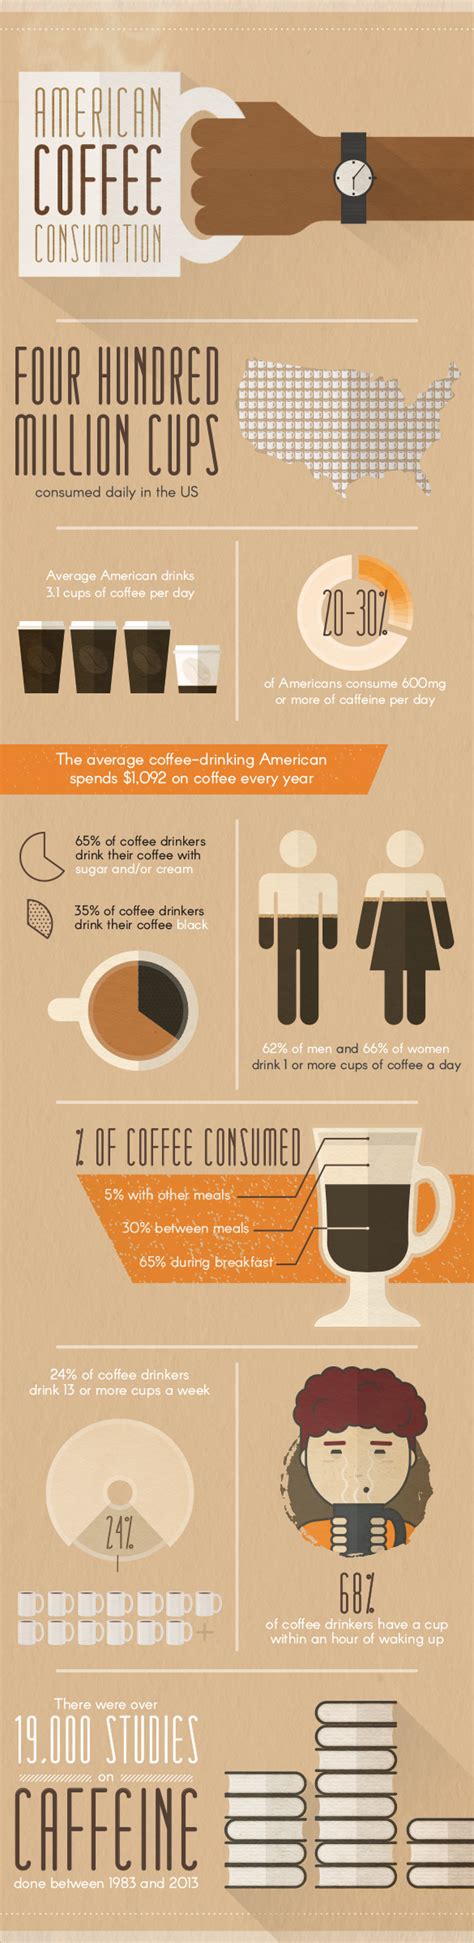 Pros And Cons Of Coffee Consumption